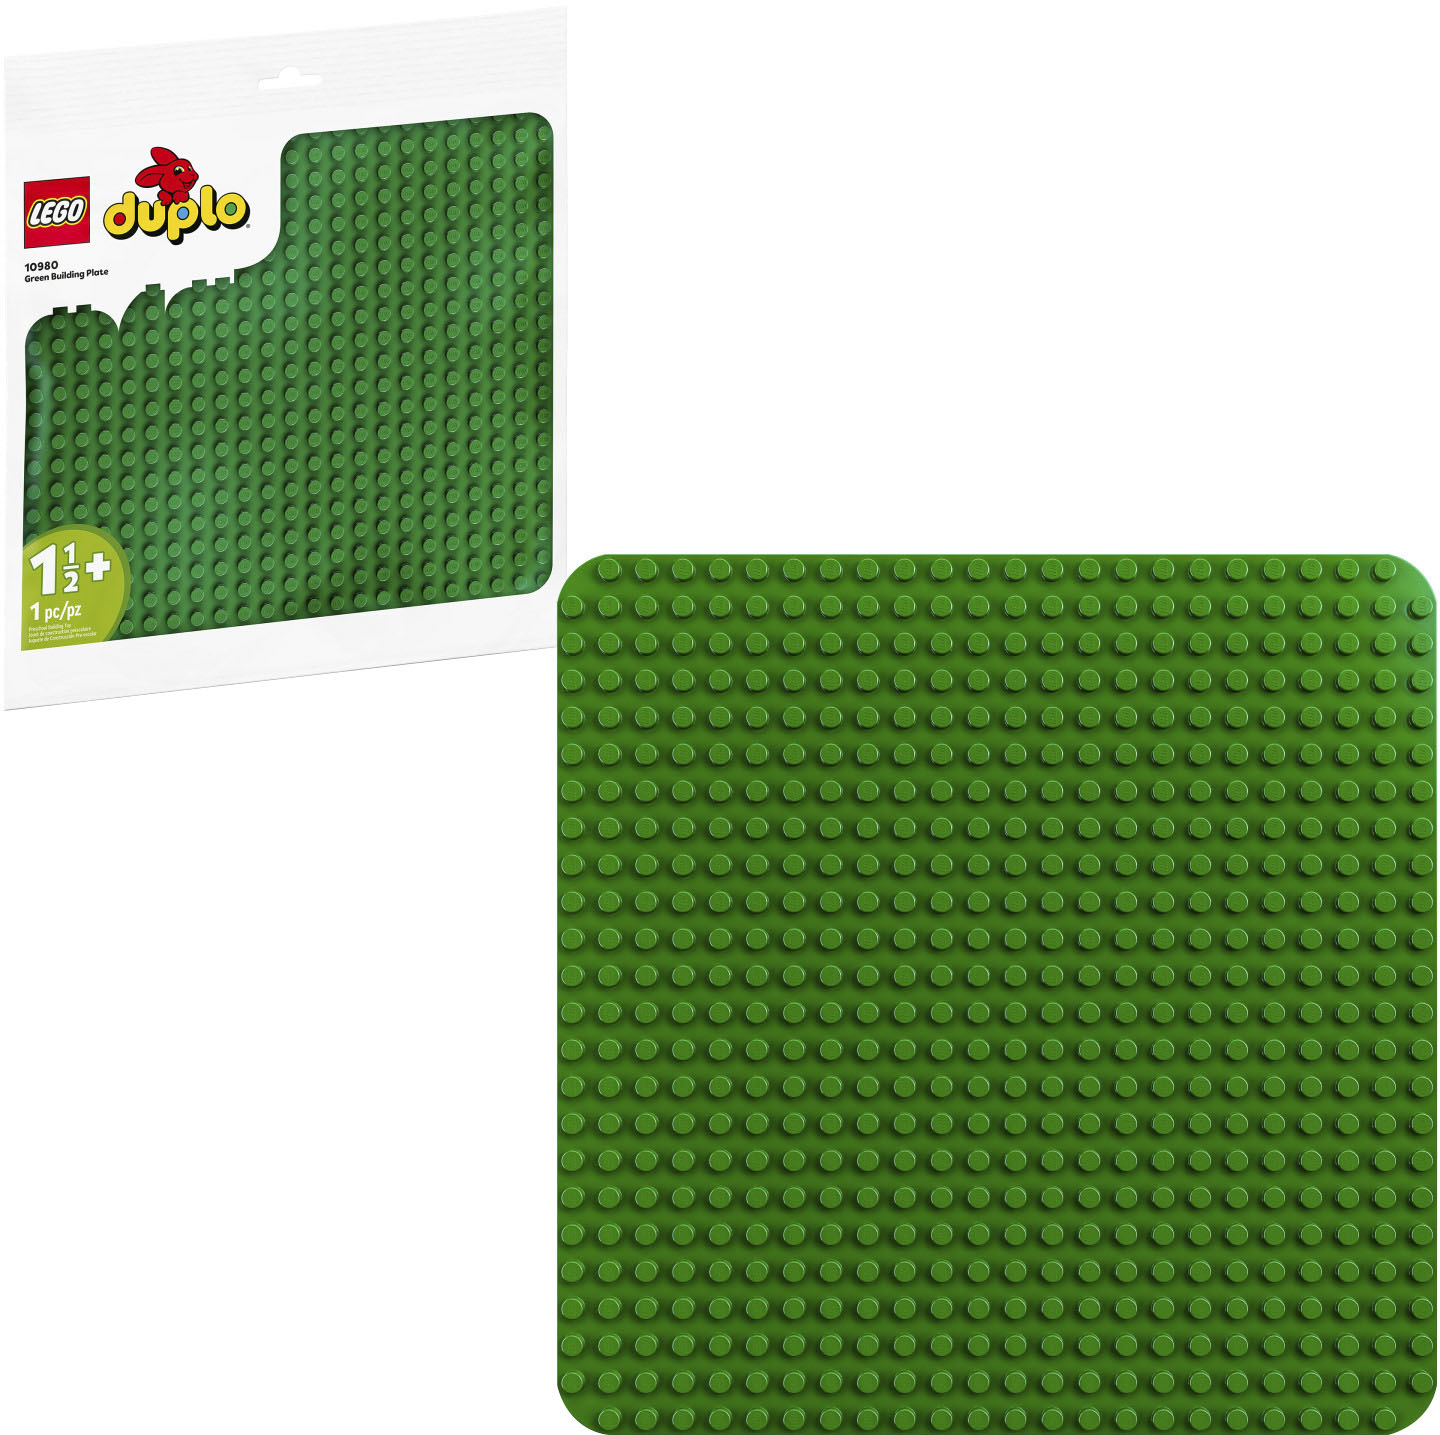 Remission Vie talsmand LEGO DUPLO Classic DUPLO Green Building Plate 10980 6387126 - Best Buy